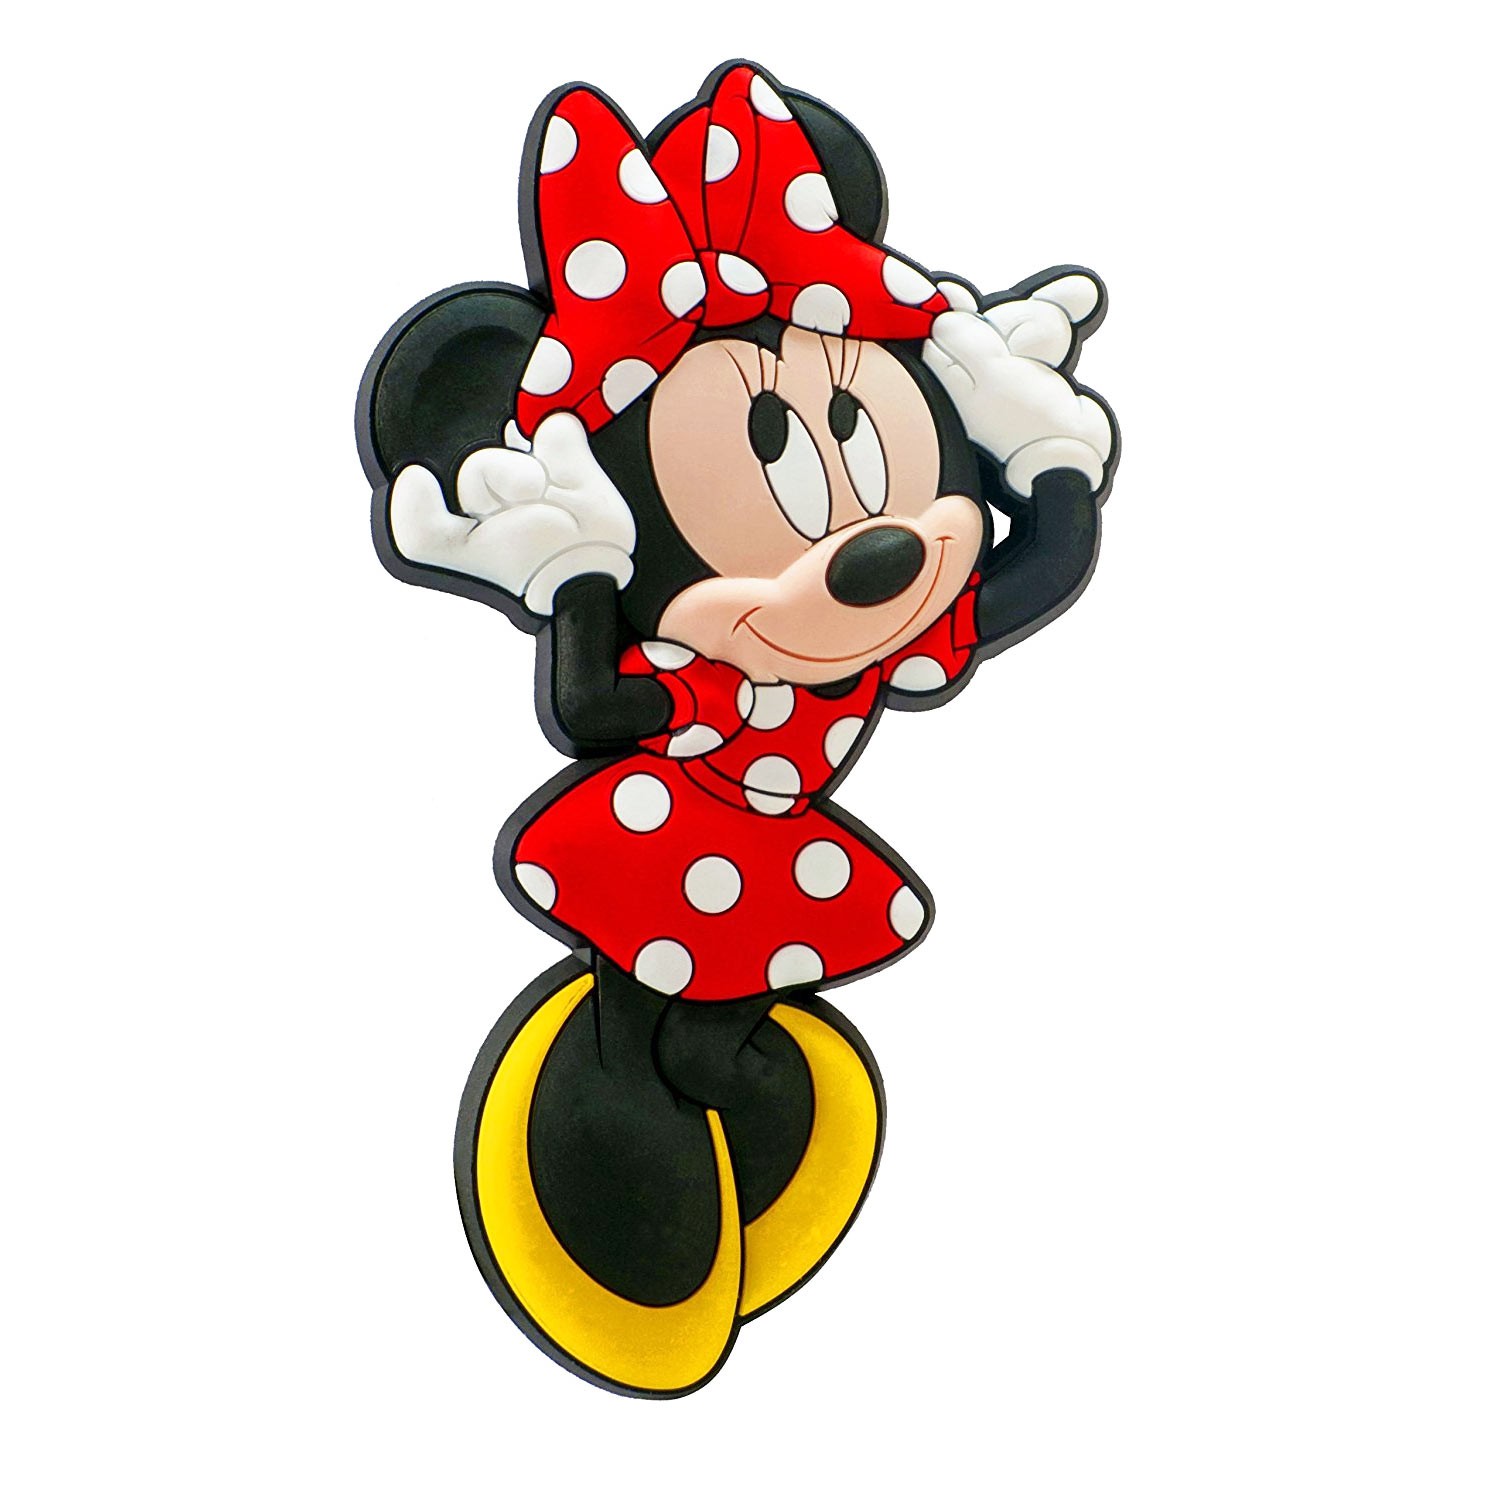 Minnie Mouse Soft Touch Magnet